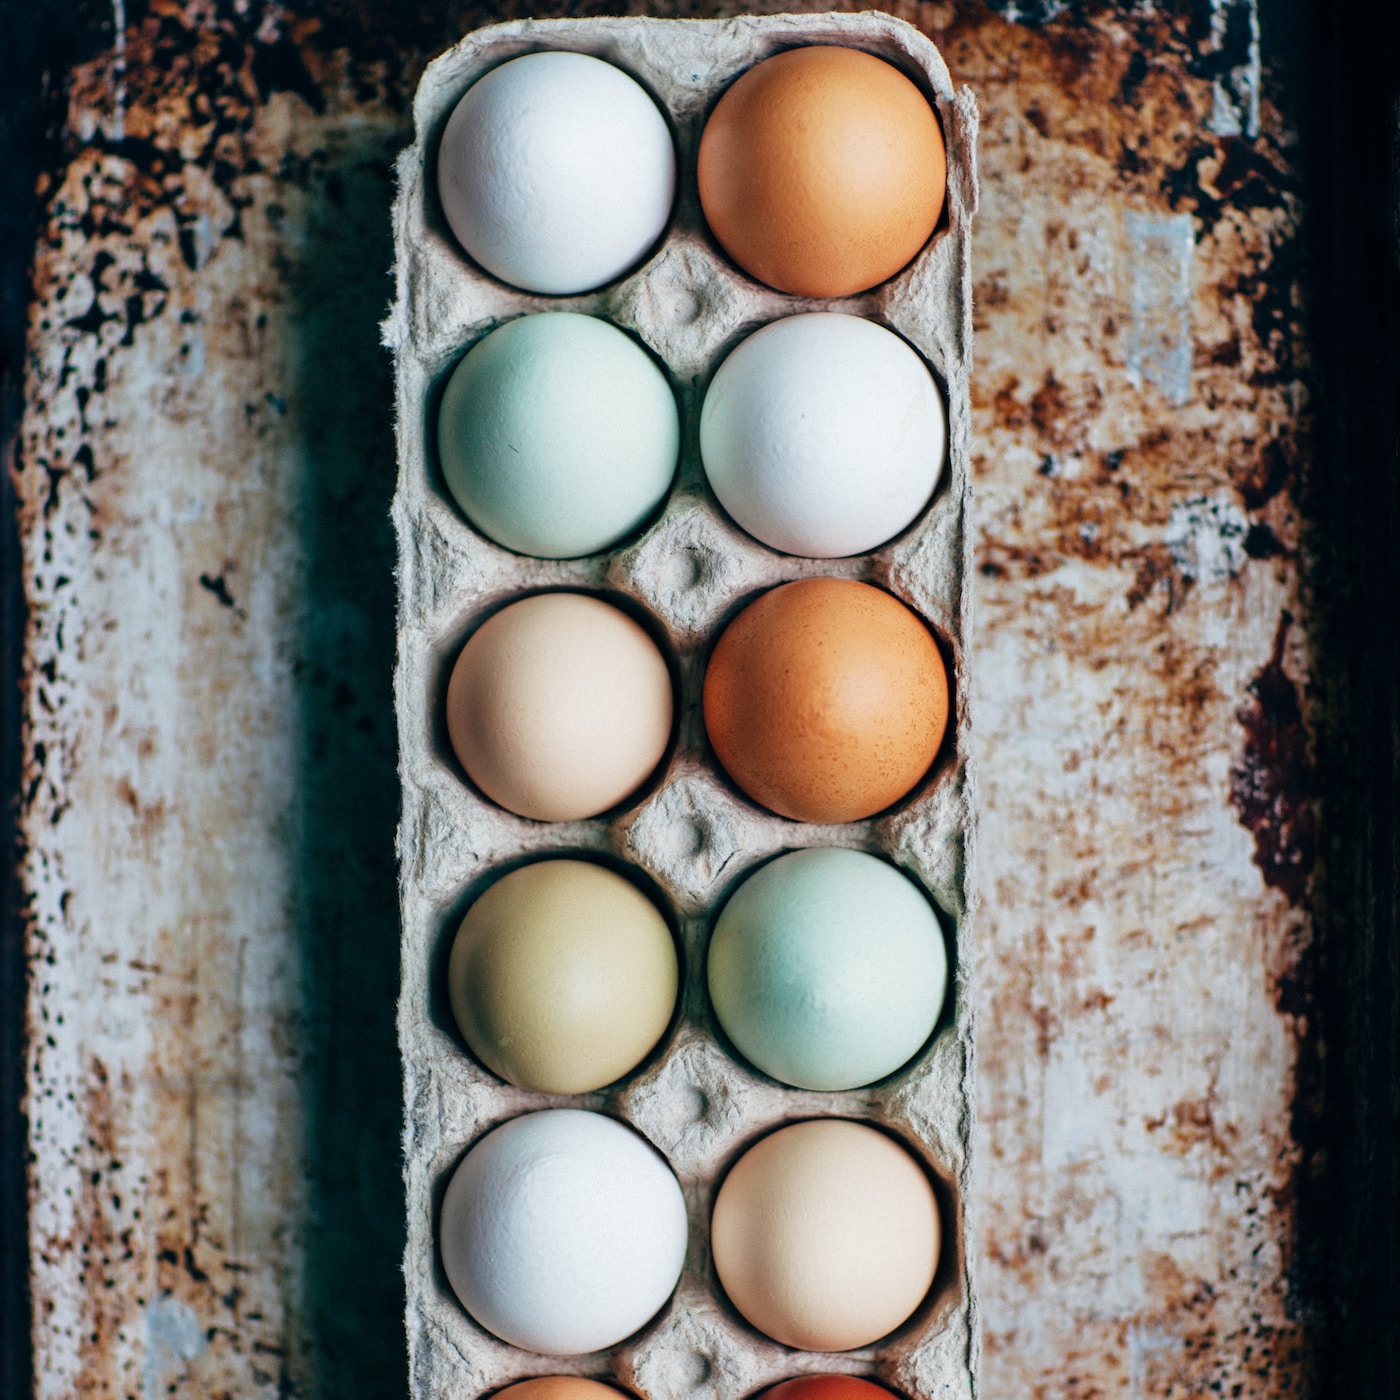 8 Delicious Reasons to Love Eggs ...